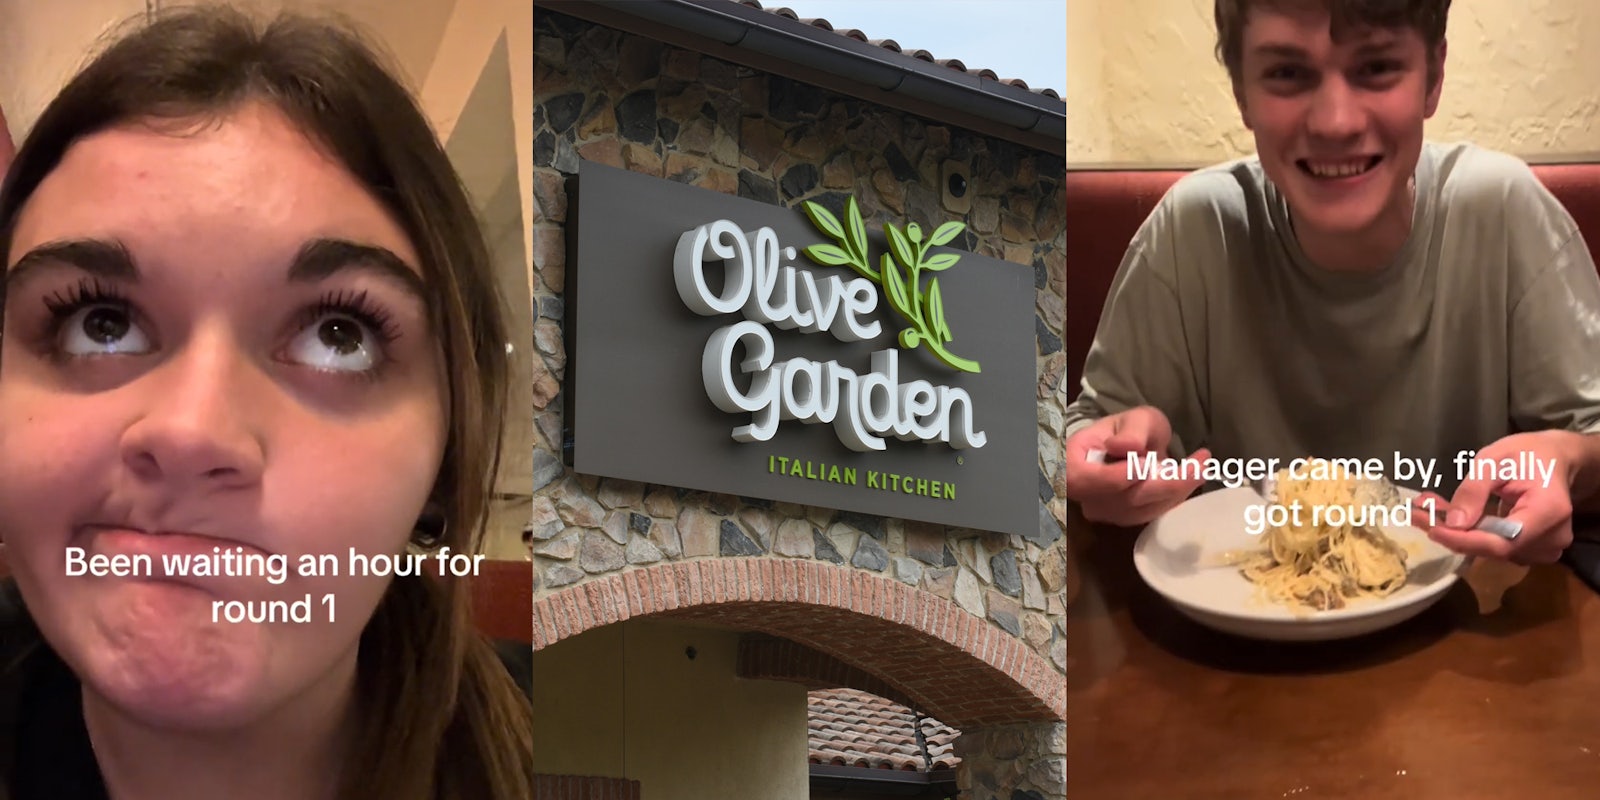 Olive Garden customer with caption 'Been waiting an hour for round 1' (l) Olive Garden sign on building (c) Olive Garden customer eating with caption 'Manager came by, finally got round 1' (r)